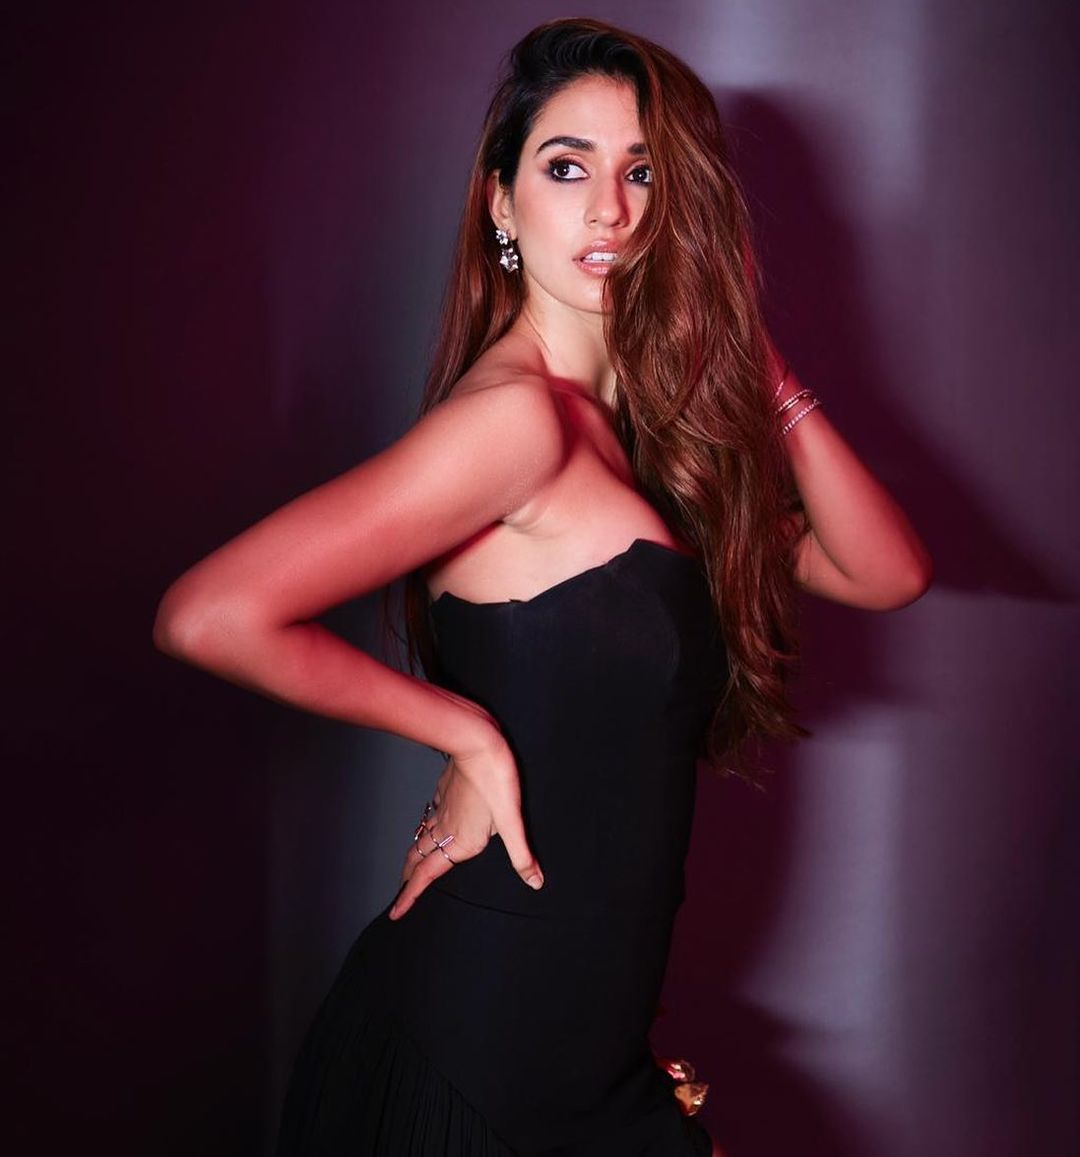  Disha flaunted her body in a black dress. (Image: Instagram)